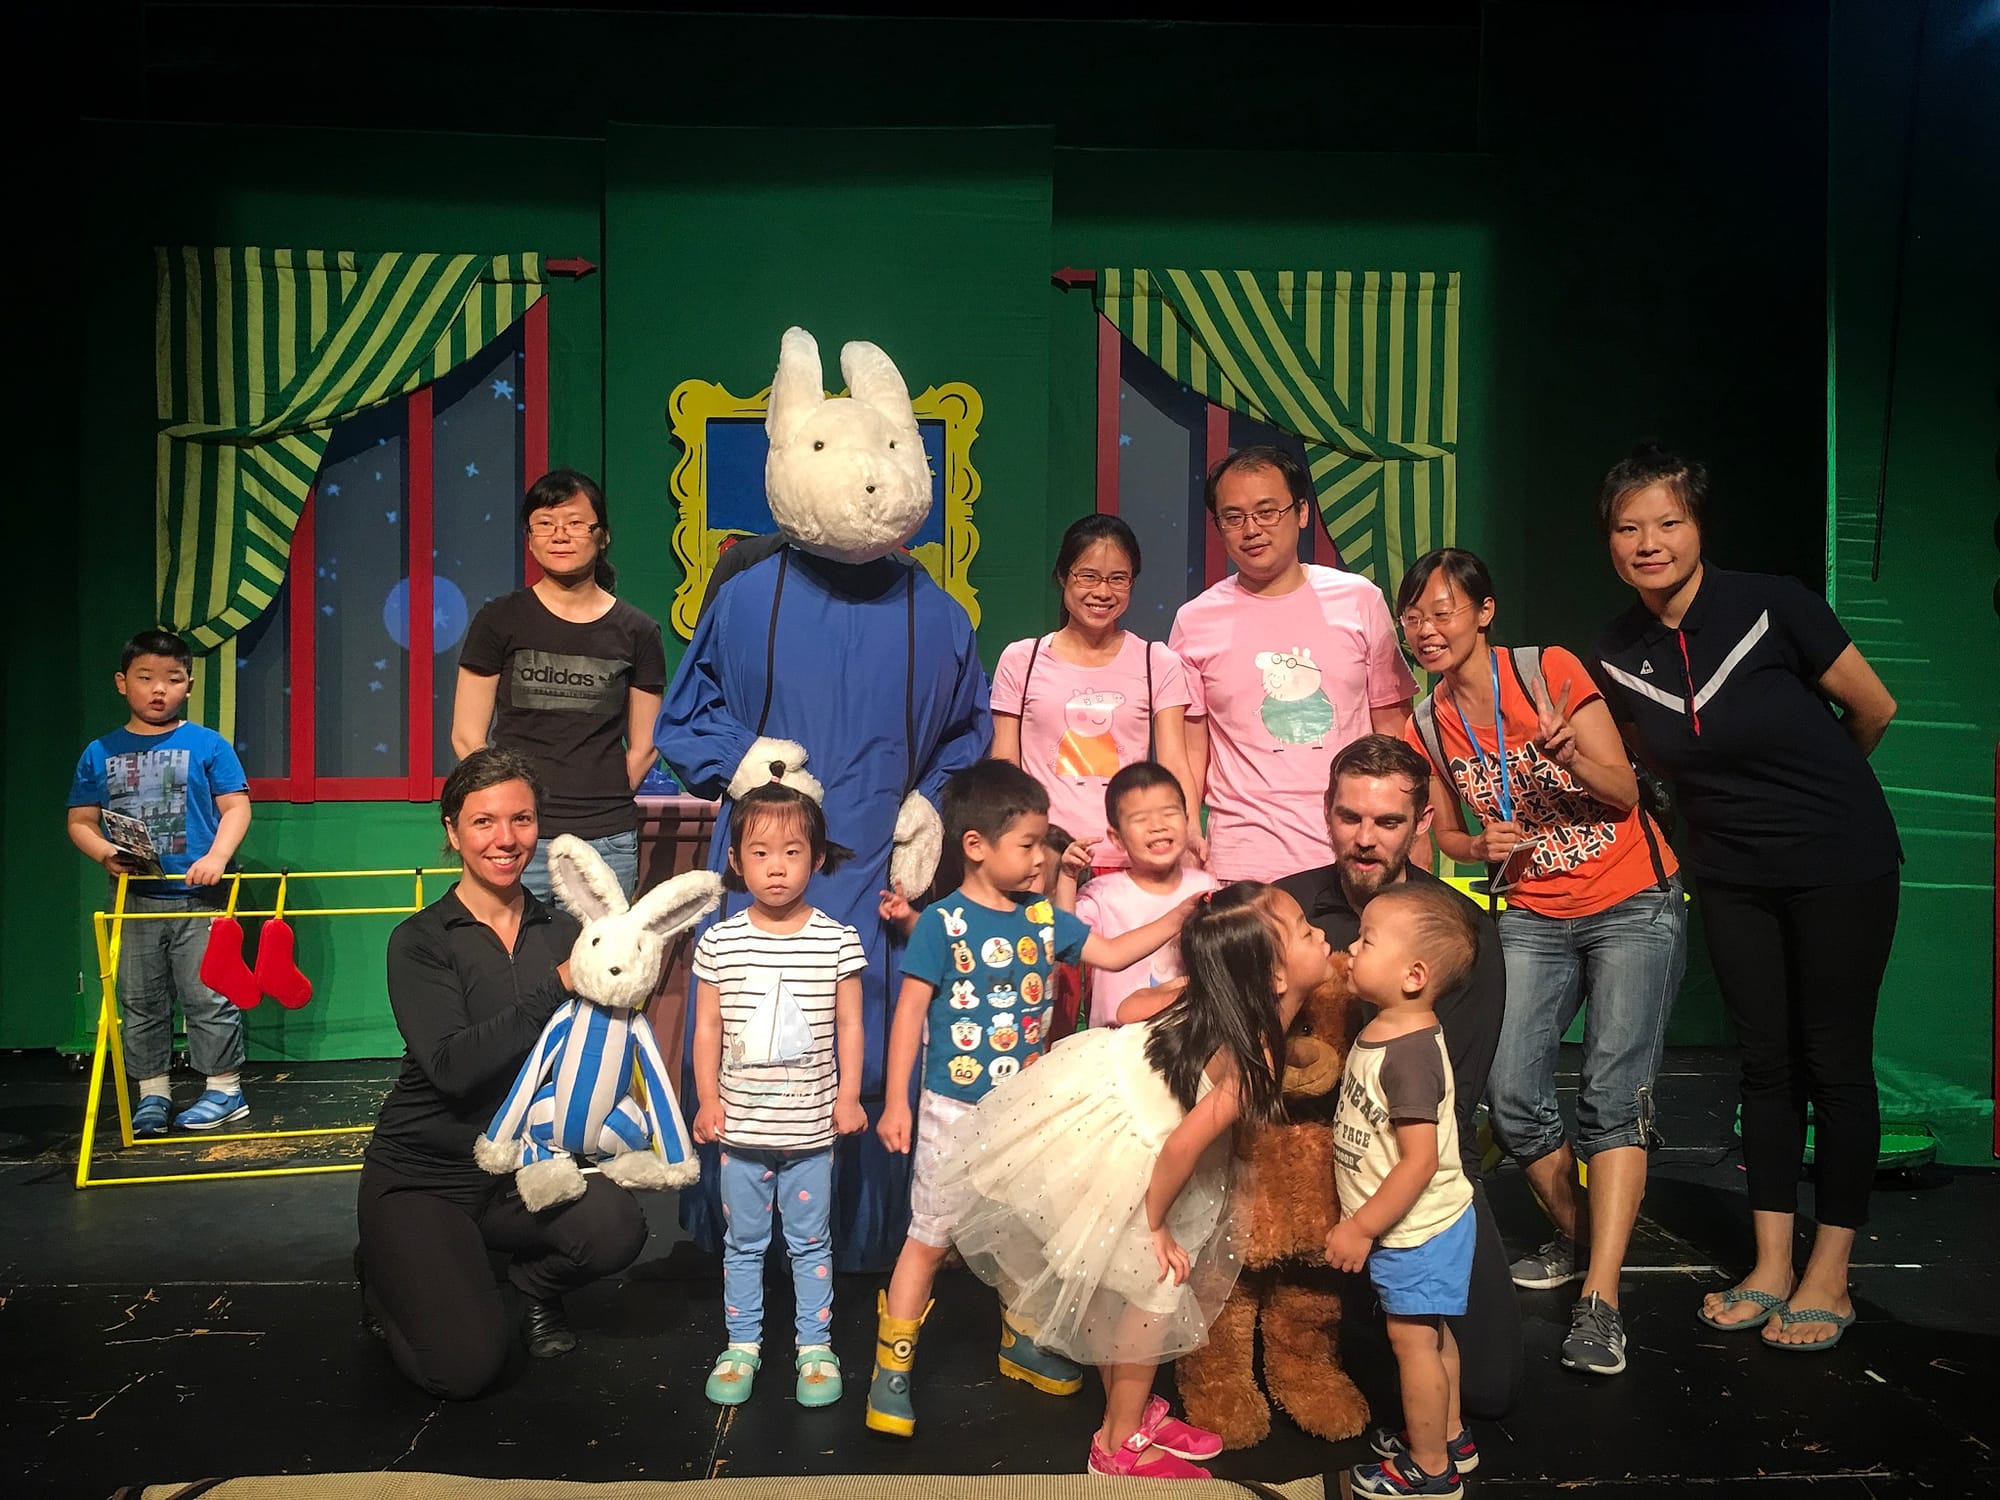 After performing a puppet show in shanghai (I'm the giant bunny)